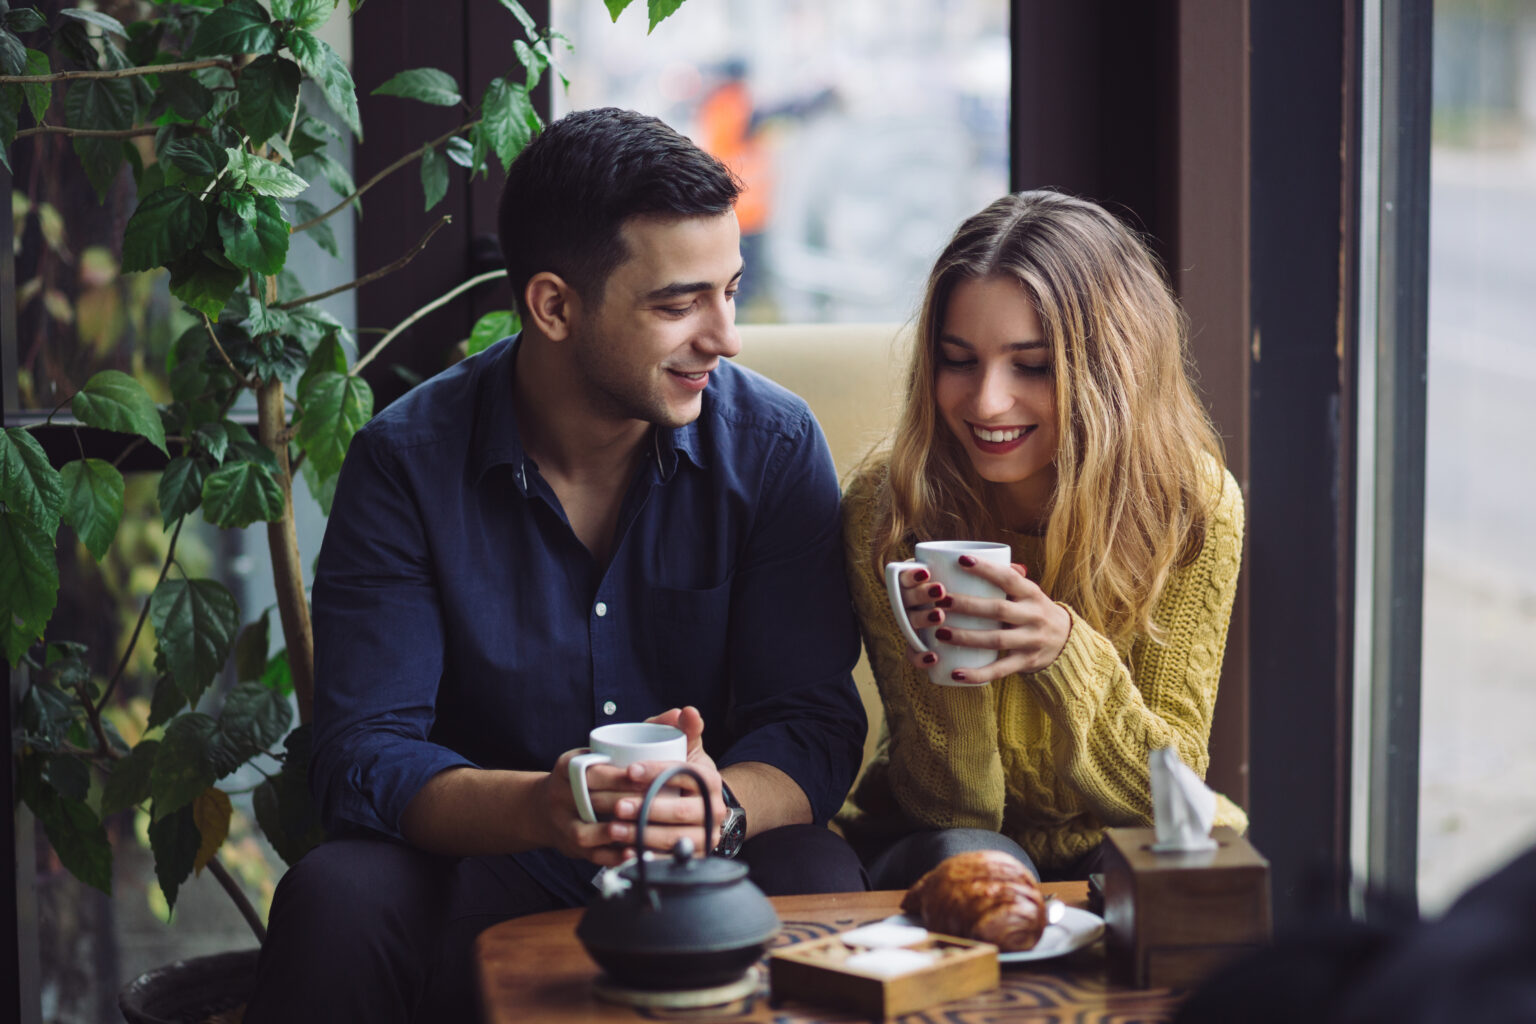 10 Fun Virtual Date Ideas to Try During COVID-19 | Life and Style Daily